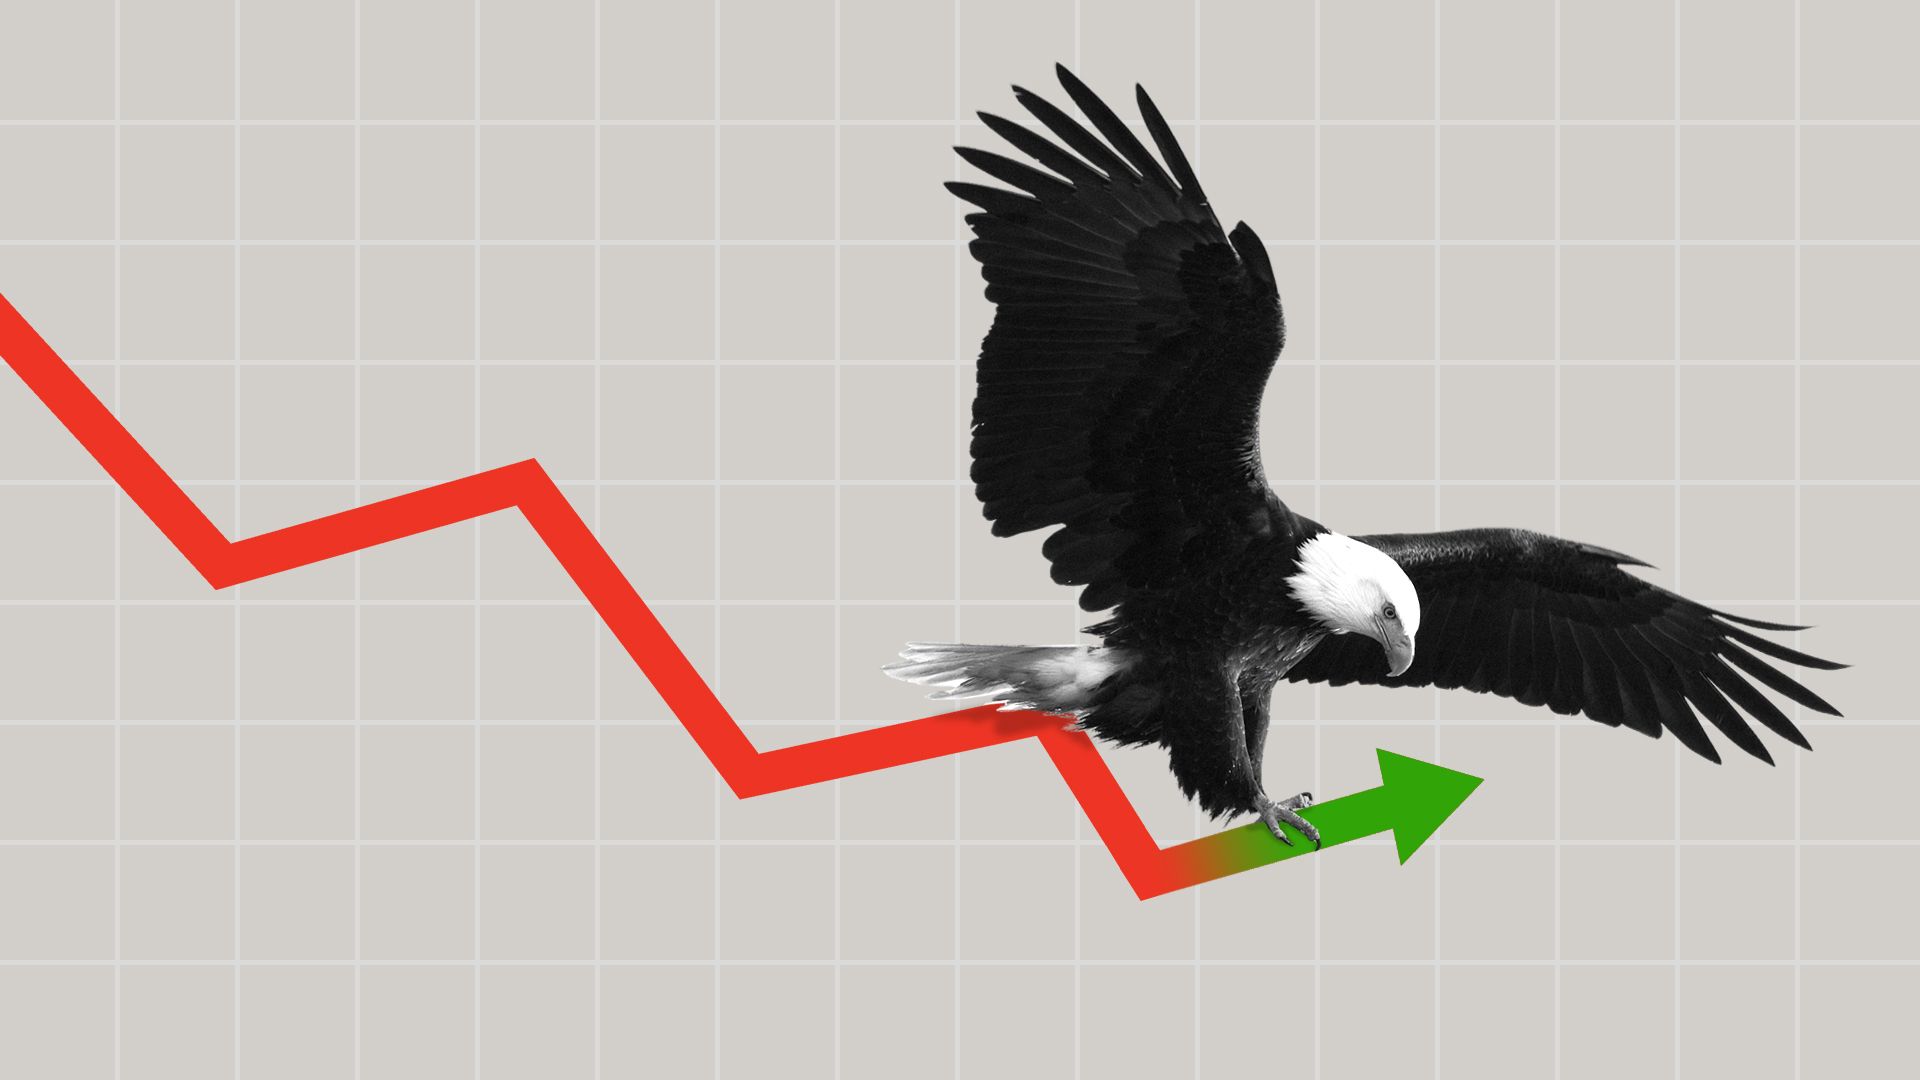 This is an eagle riding on a stock chart